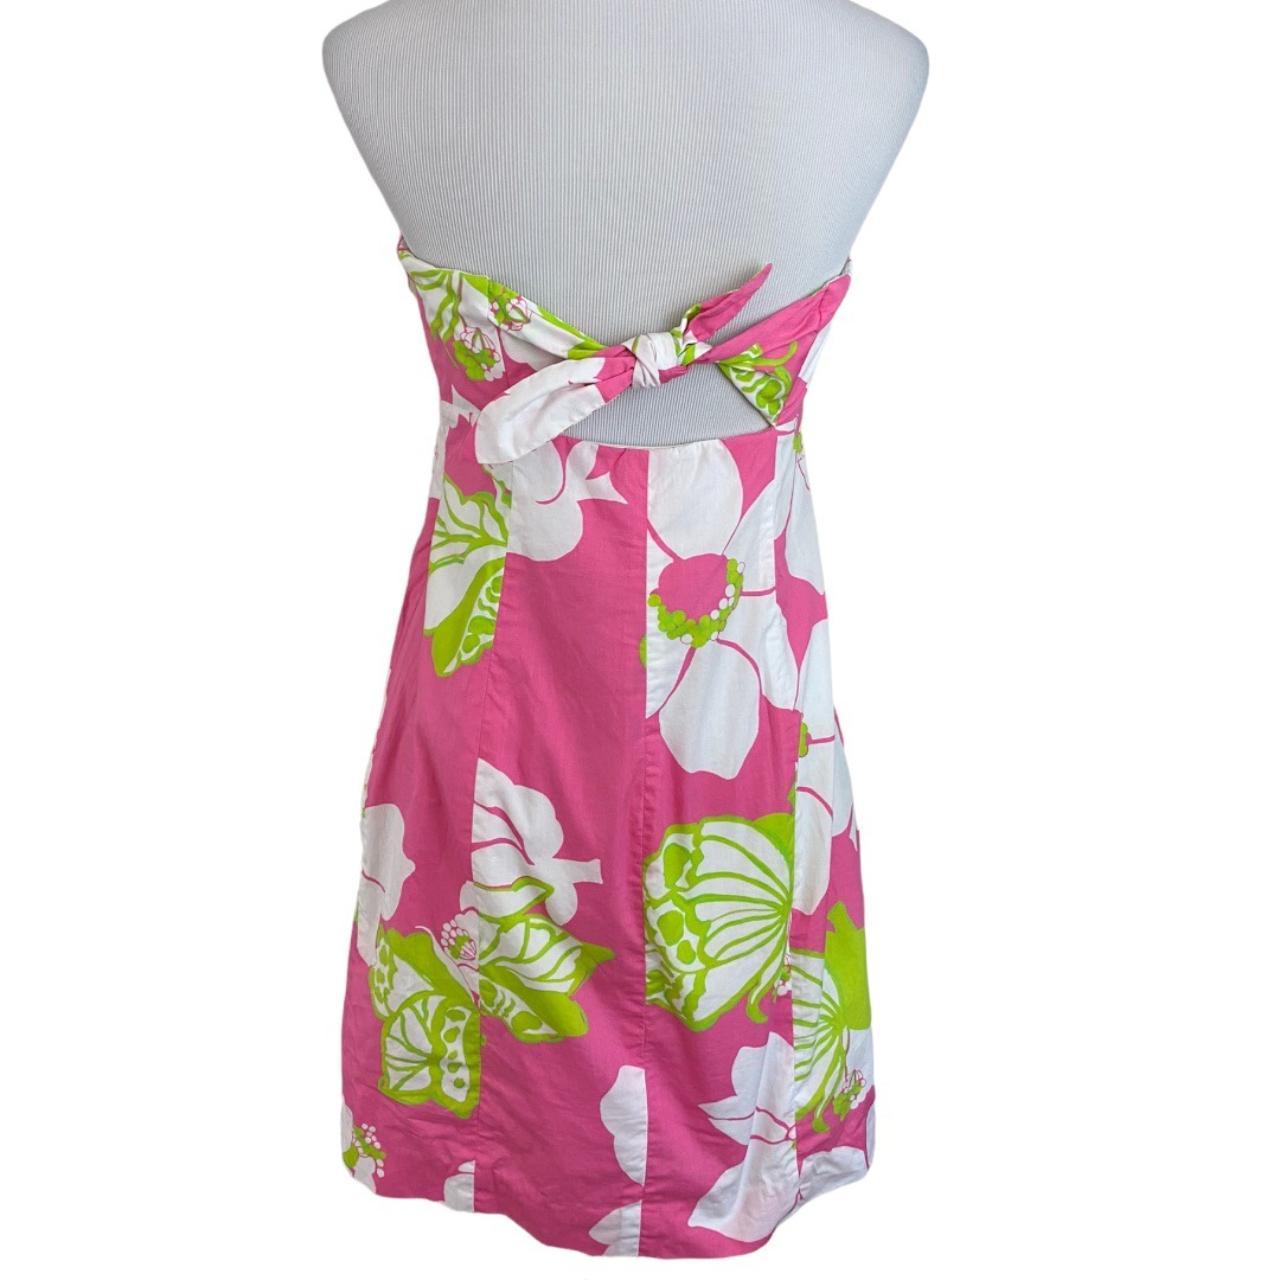 Lilly Pulitzer Women's Pink and Green Dress (3)